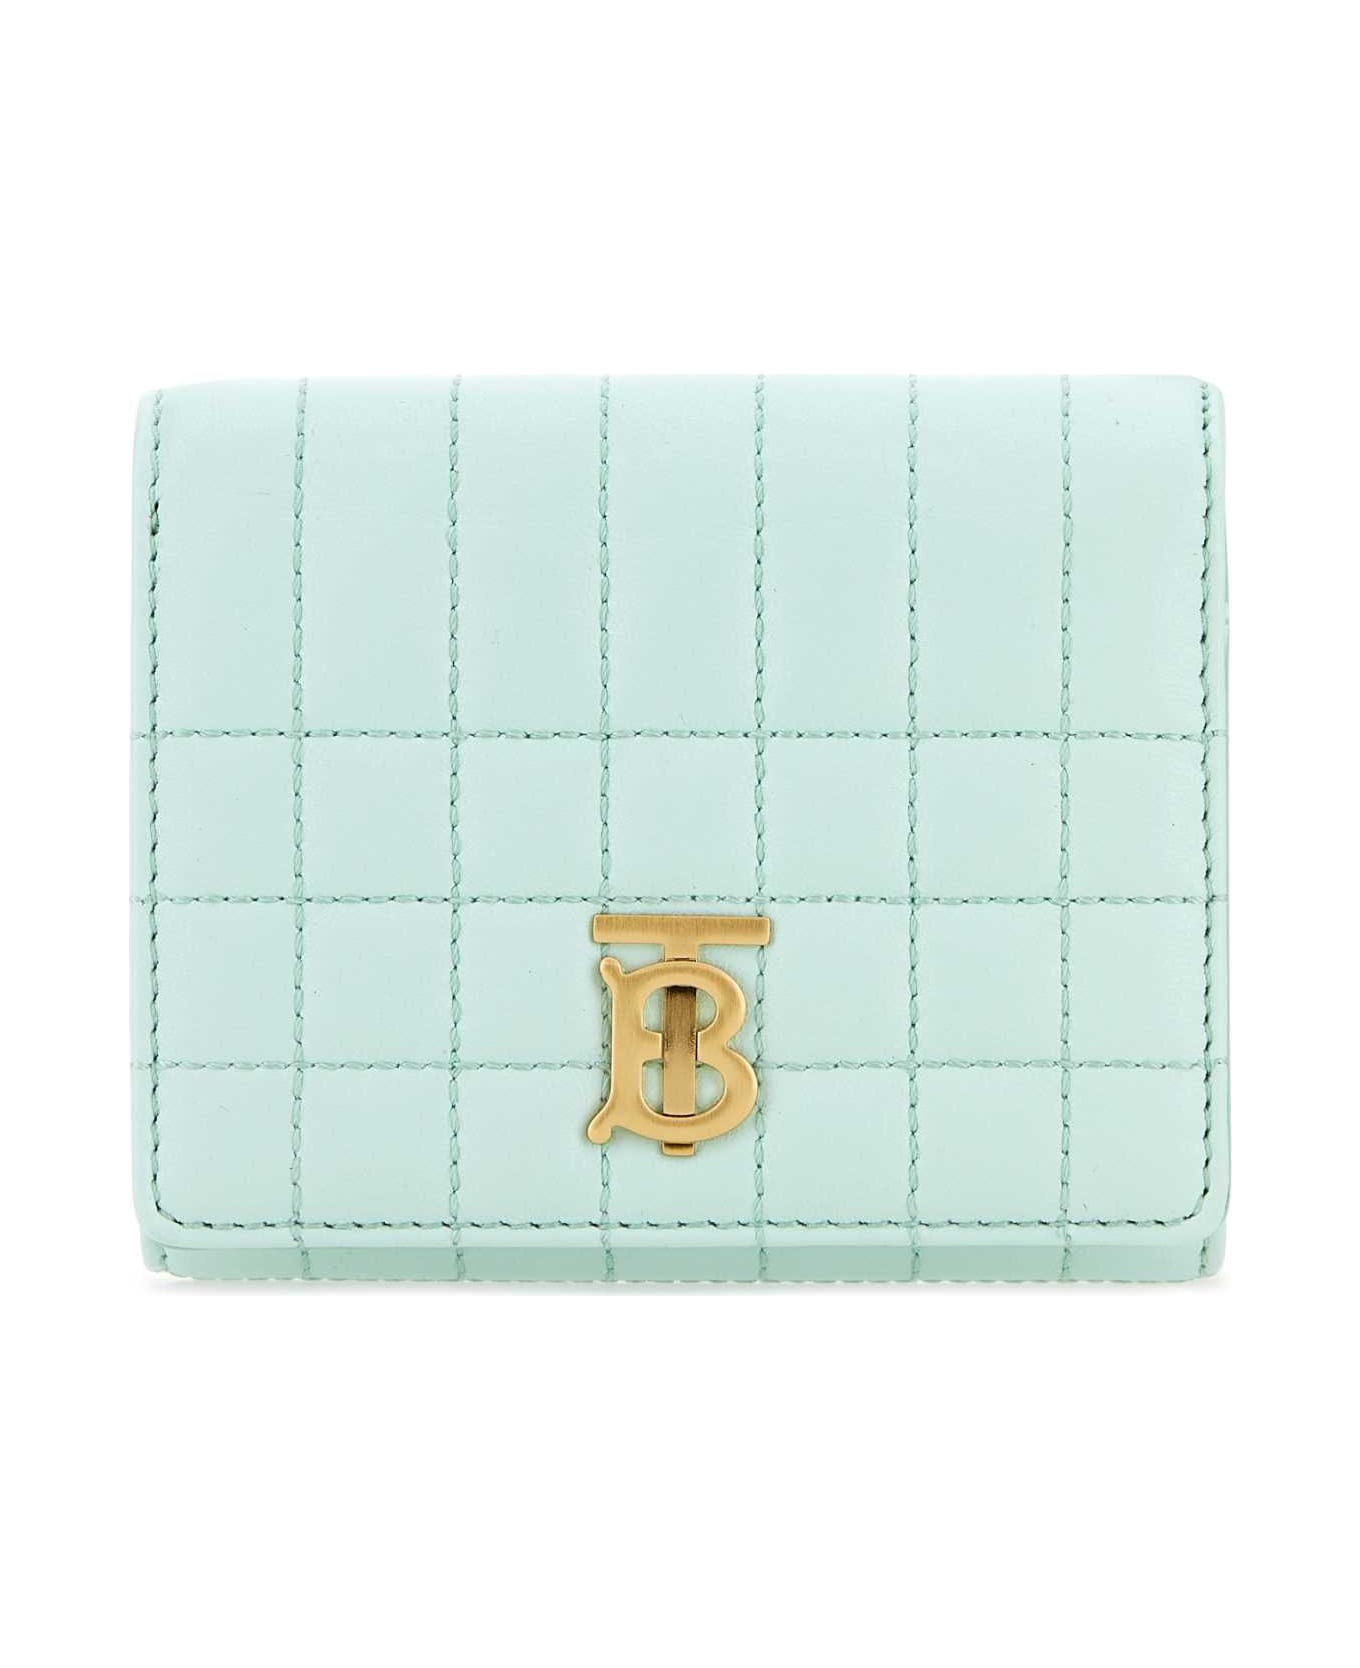 Burberry Pastel Light-blue Nappa Leather Small Lola Wallet - COOLMINT